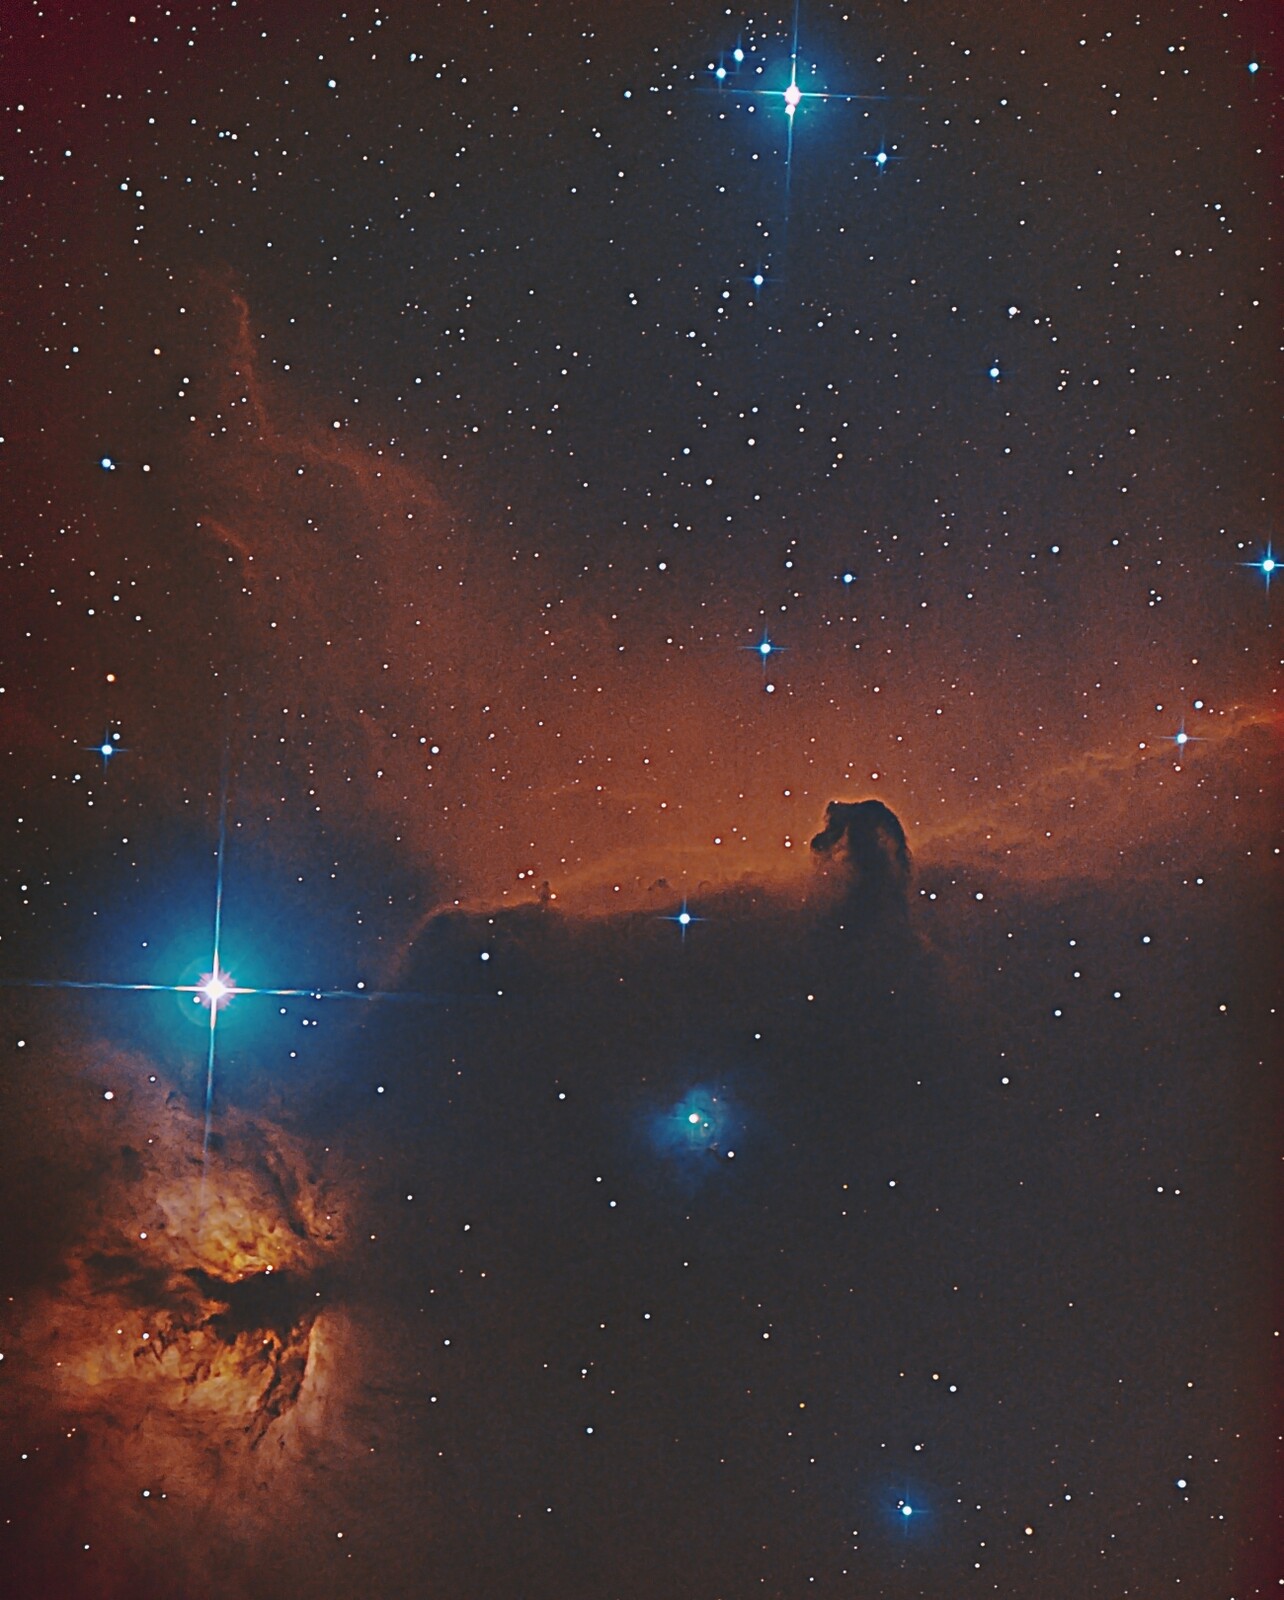 horsehead nebula B33 and NGC 2024 from December 19th, 2019; 8" f/4 newtonian; mod. Canon 77d; 310x32 sec;